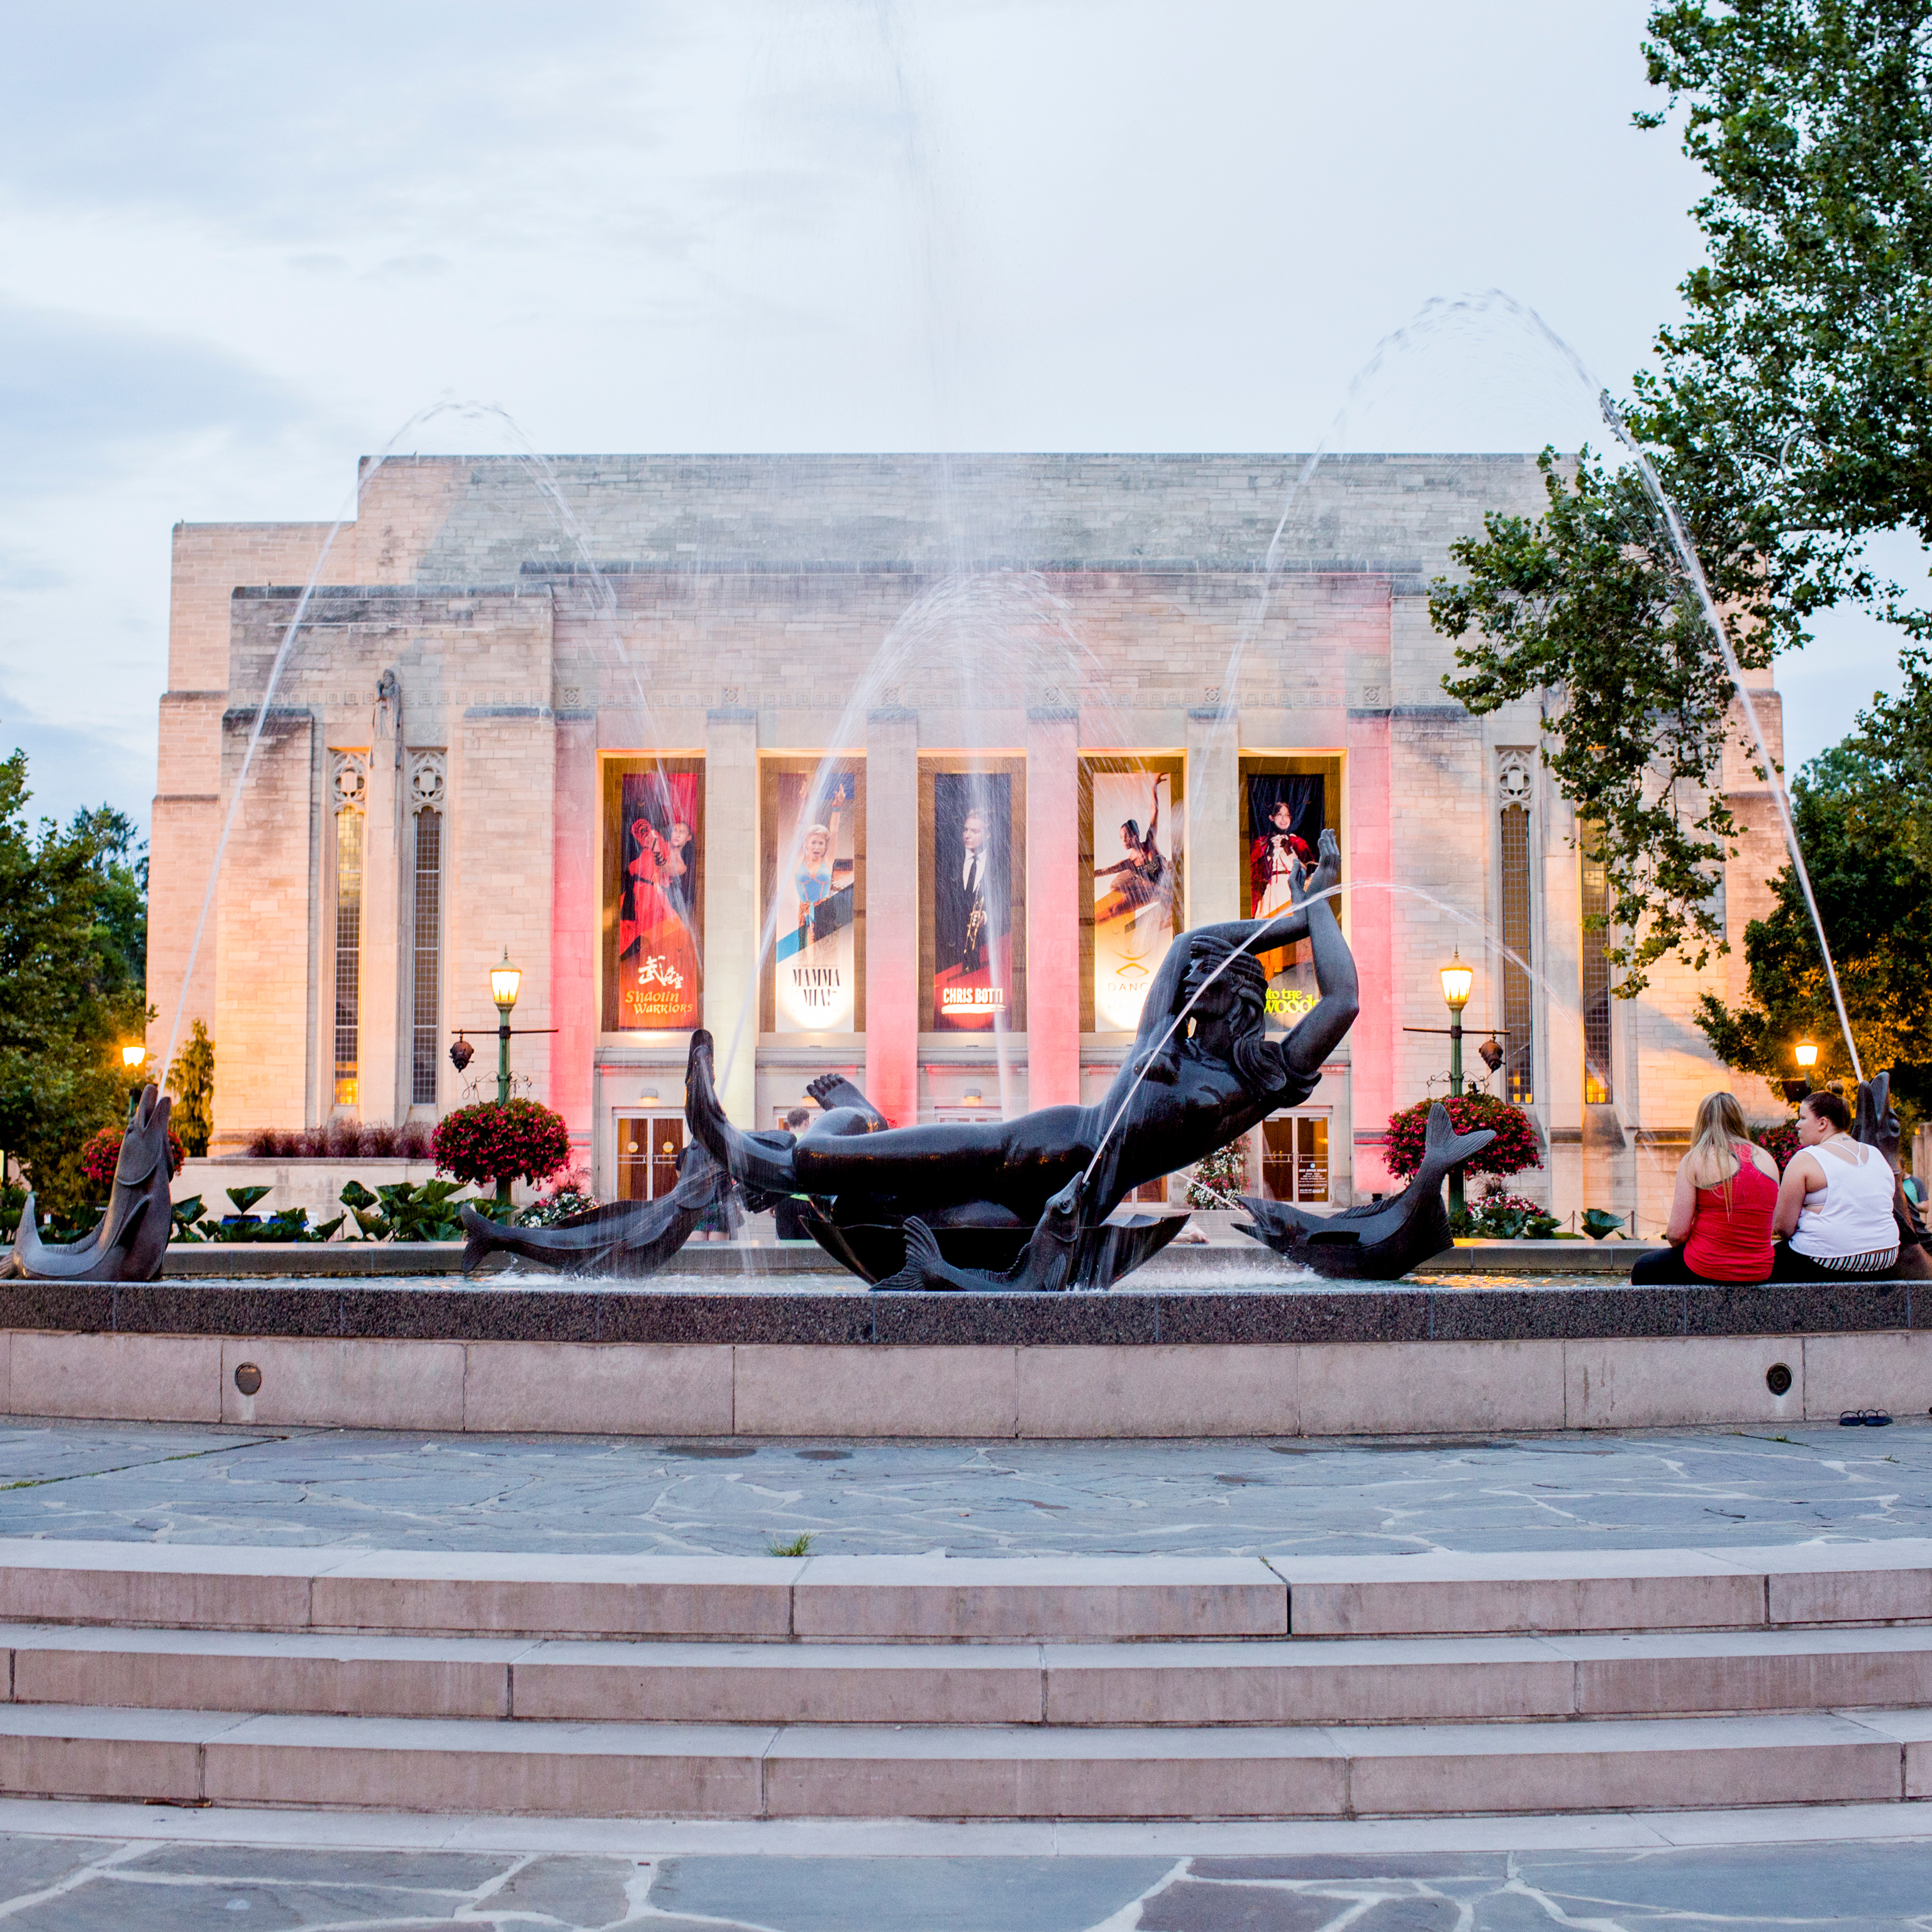 A shot of Indiana Auditorium, with the Venus fountain in front, with students on the right